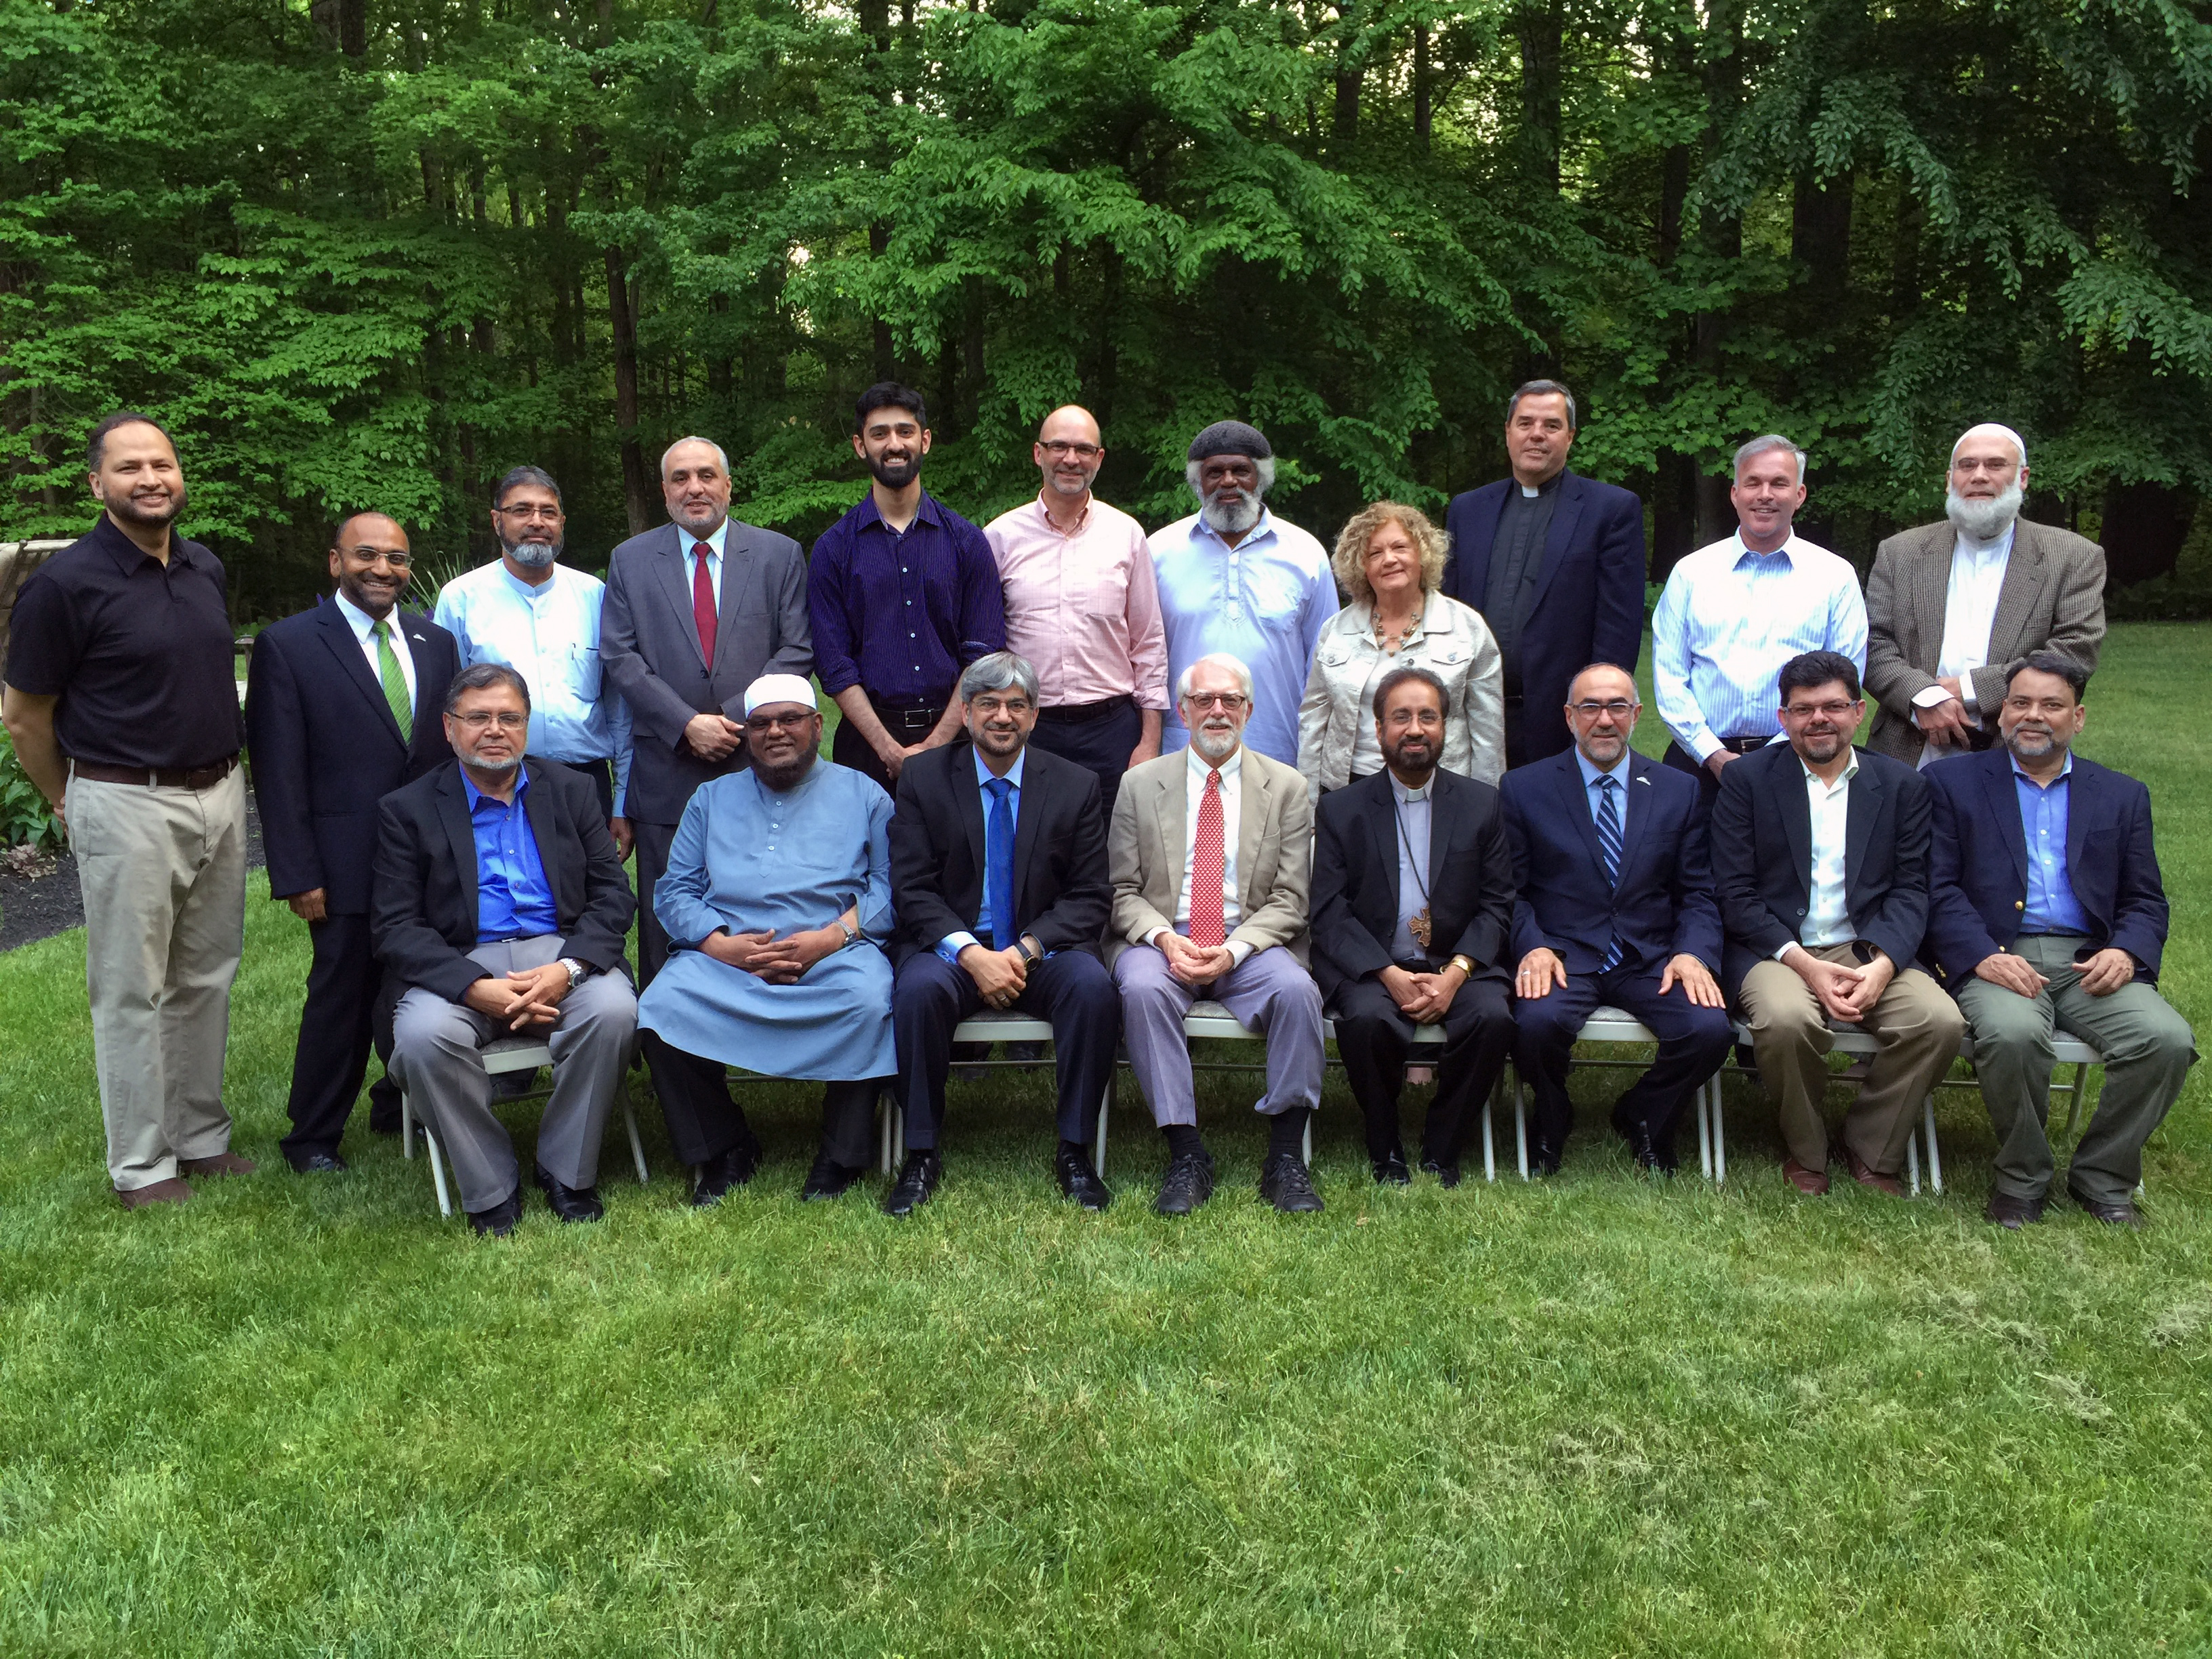 Participants pose for a photo during an interfaith meeting of the National Council of Churches and the US Council of Muslim Organizations (RNS/ Imam Naeem Baig)